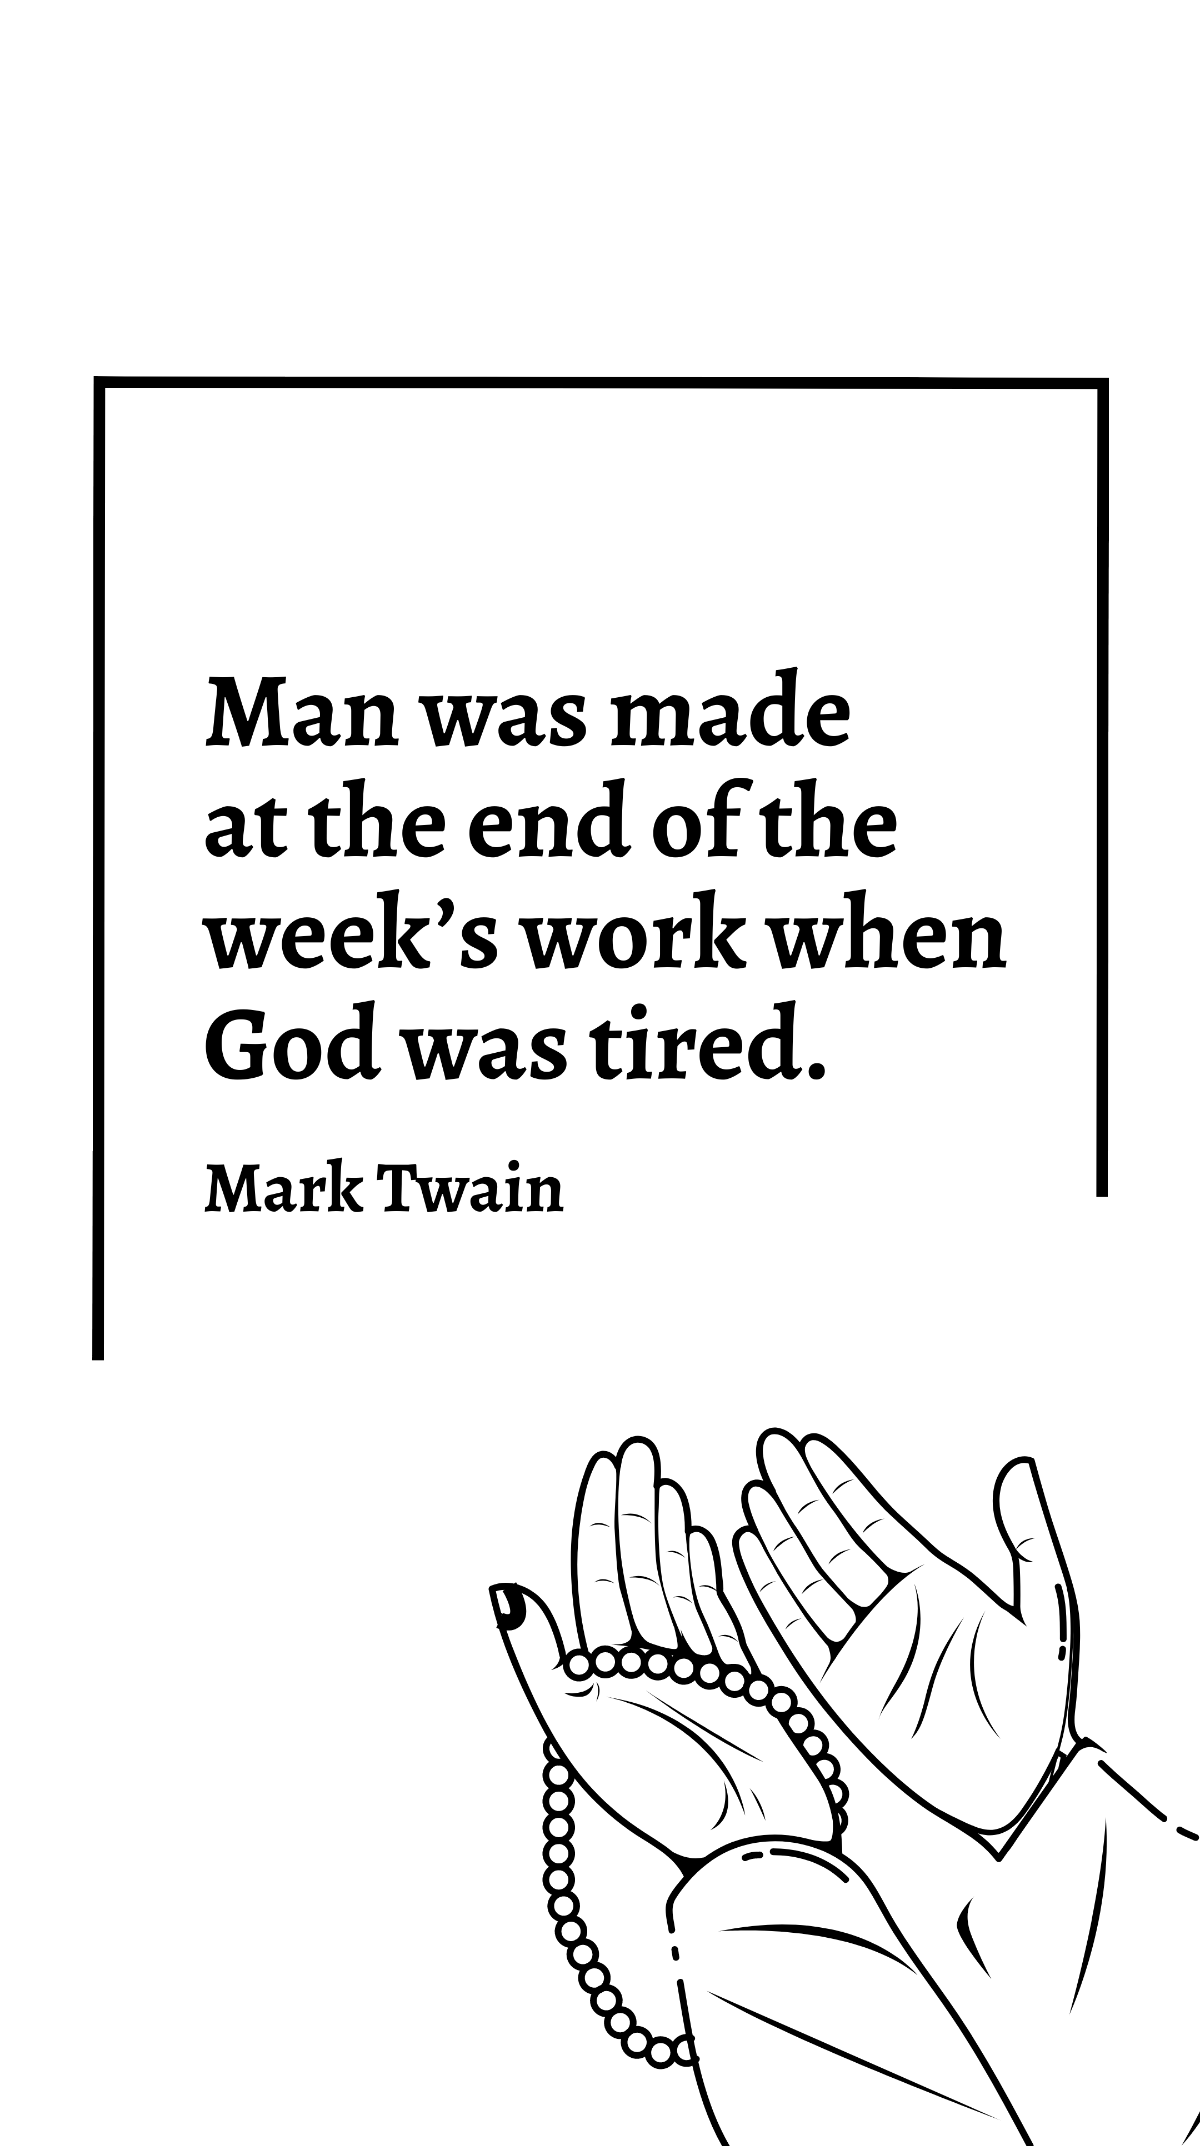 Mark Twain - Man was made at the end of the week’s work when God was tired.  Template